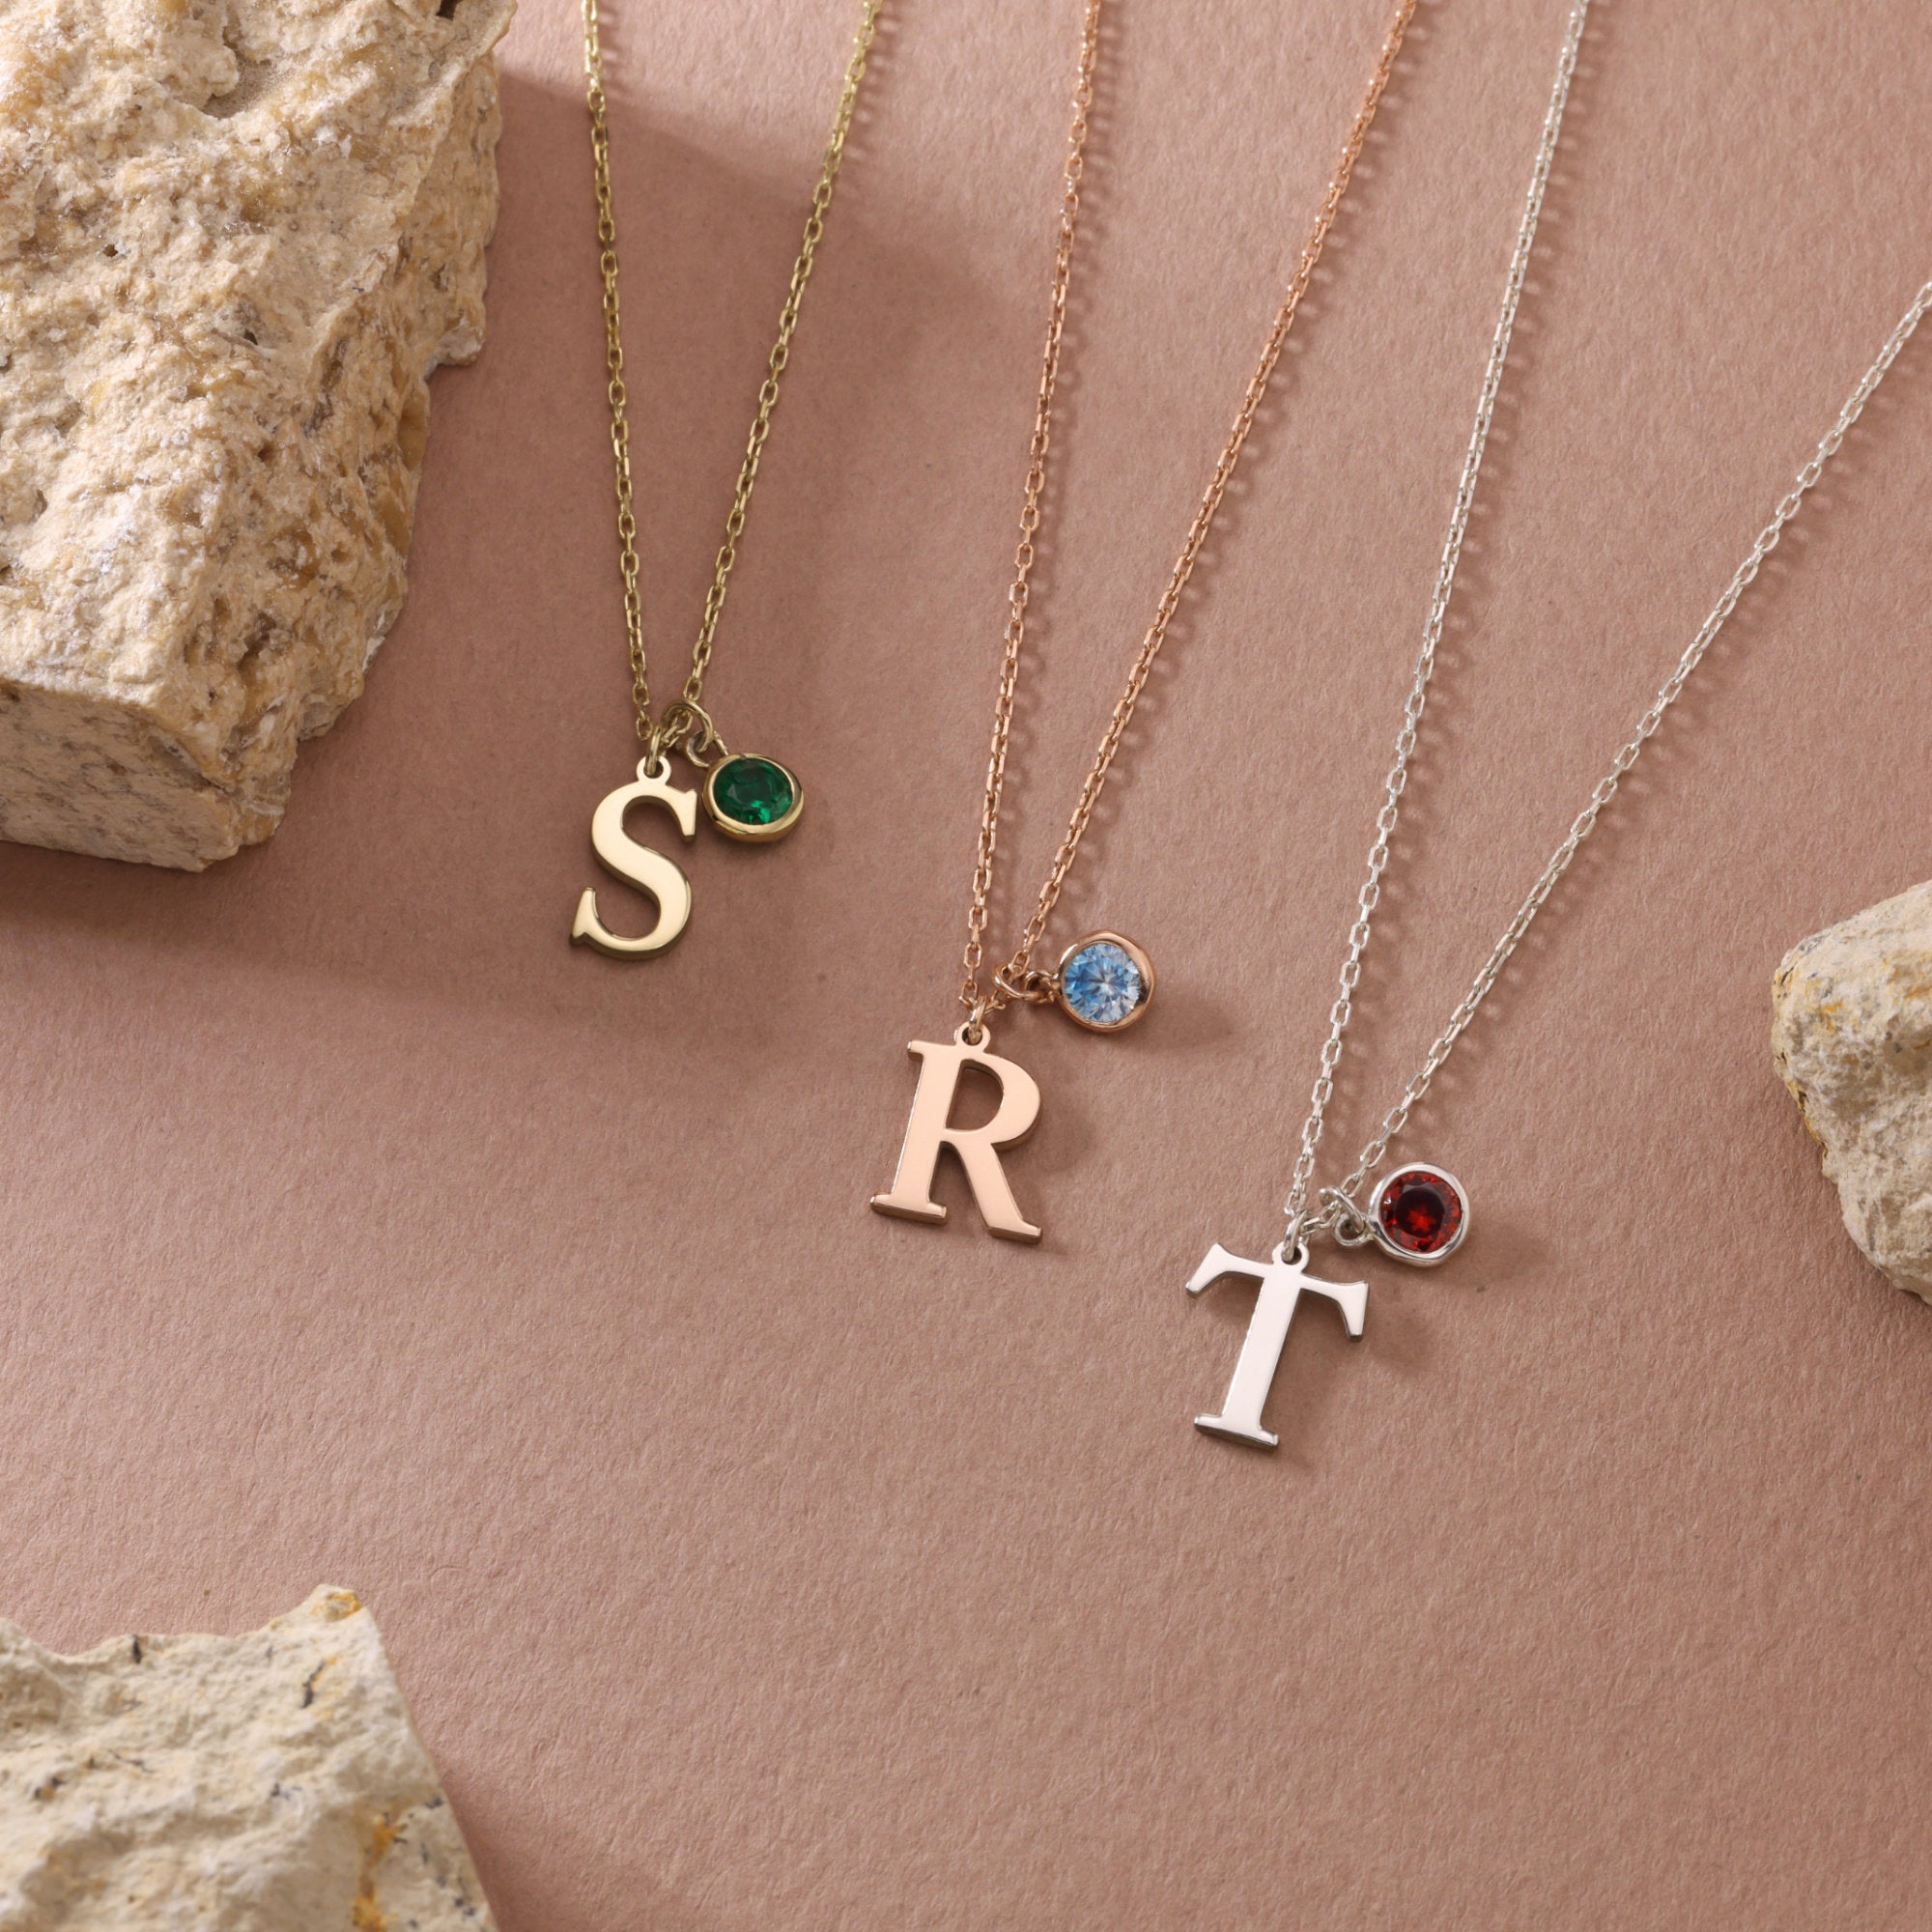 Personalized Initial Necklace with Birthstone